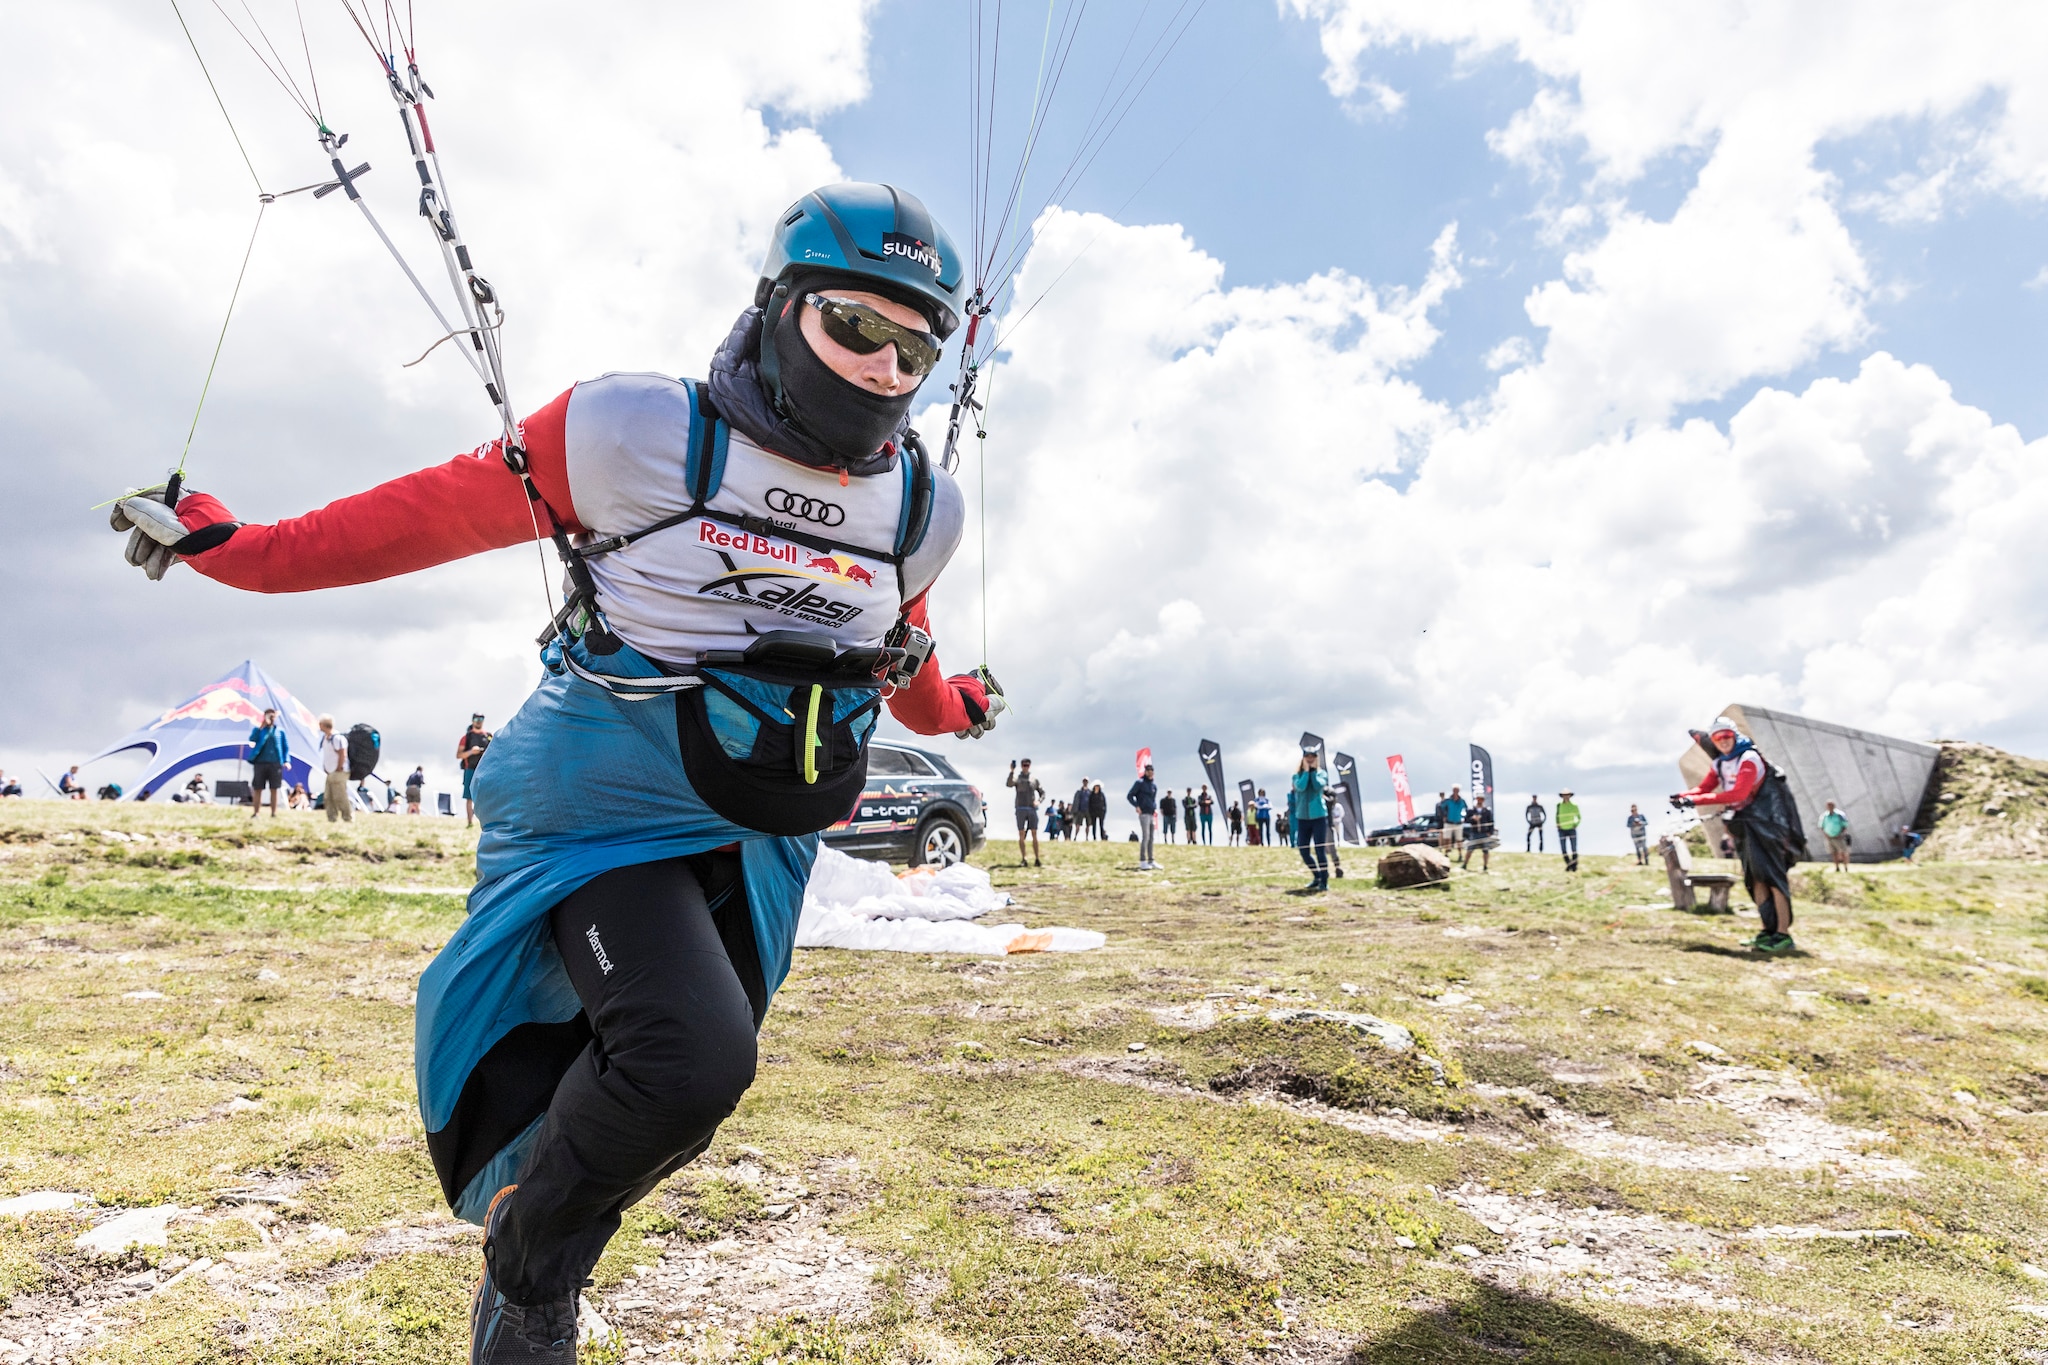 Evgenii Griaznov (RUS) performs during the Red Bull X-Alps at Turnpoint 4, Italy on July 18, 2019